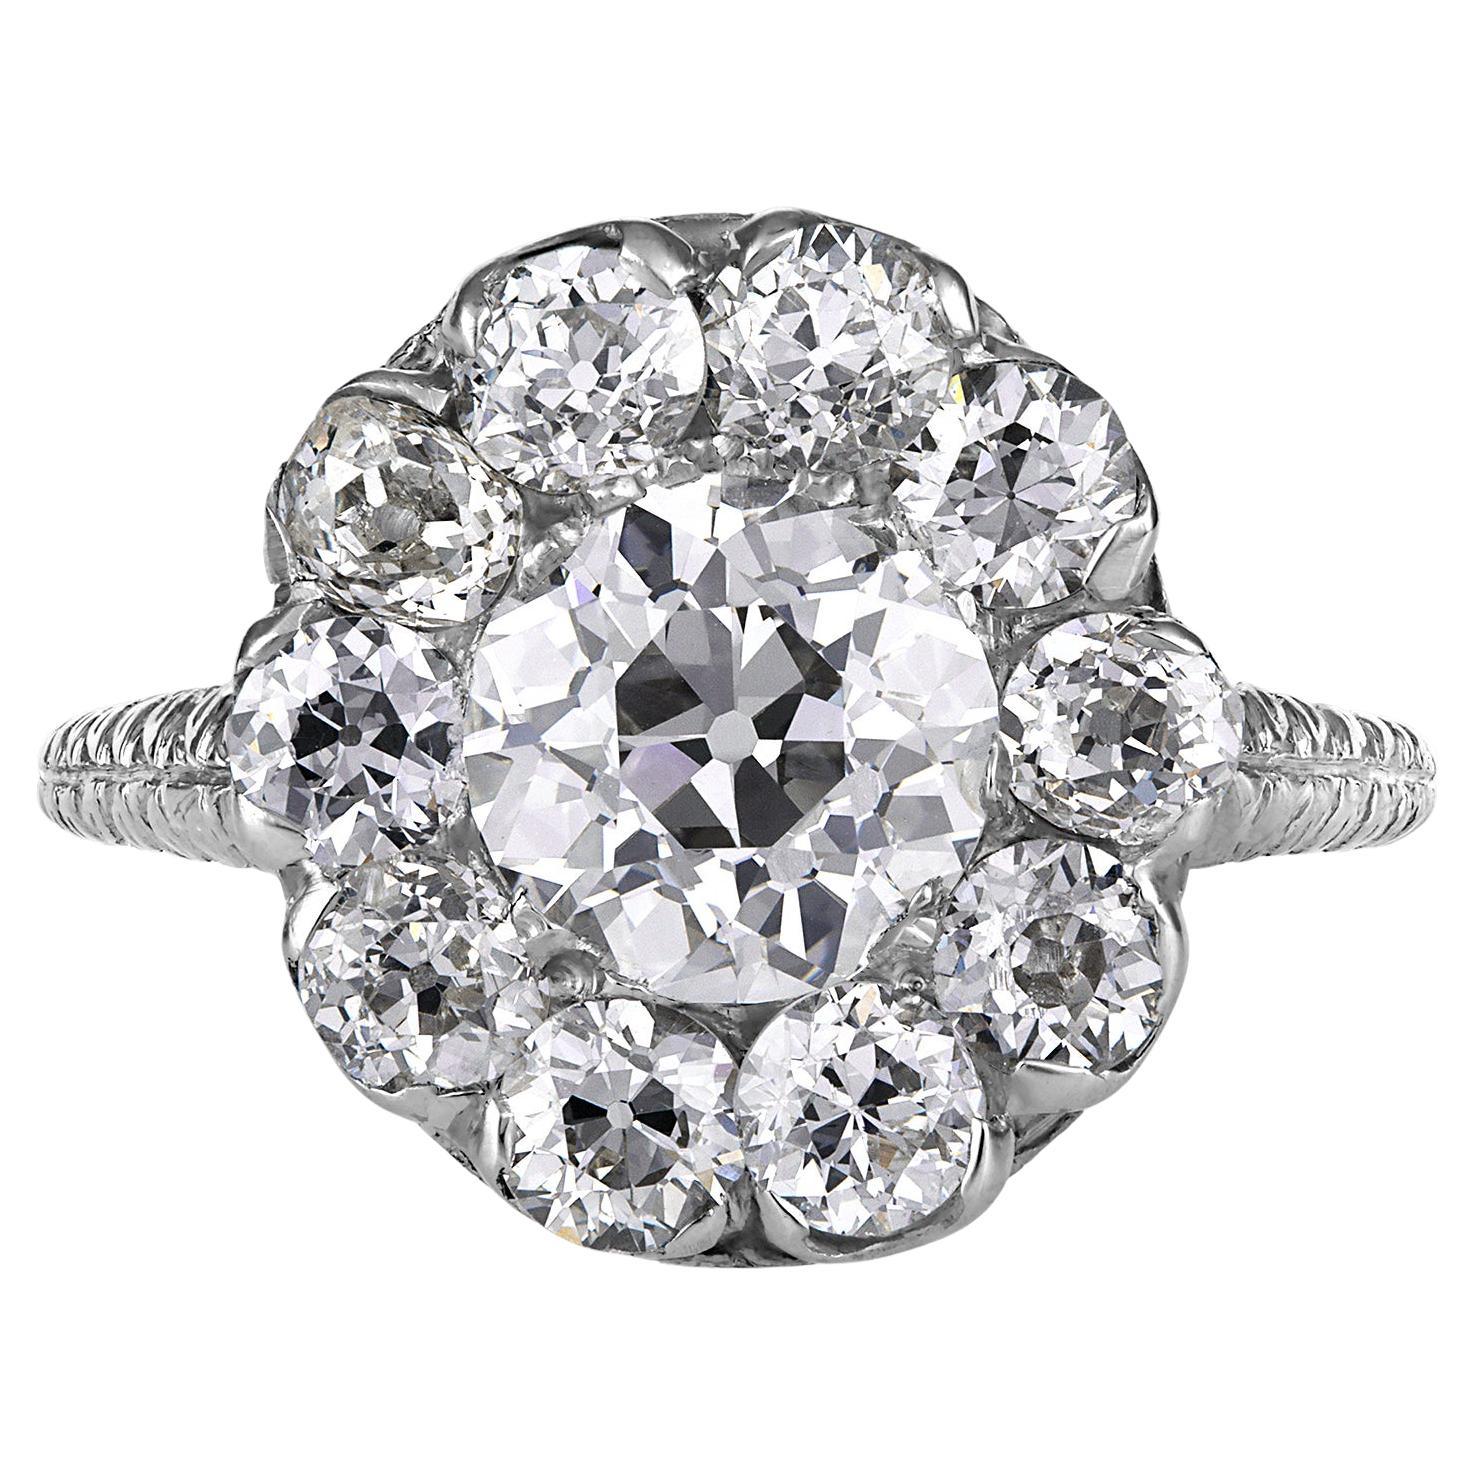 Antique Edwardian 1900s GIA H-VS2 3.38ctw OLD Euro Cut Diamond Cluster Plat Ring For Sale